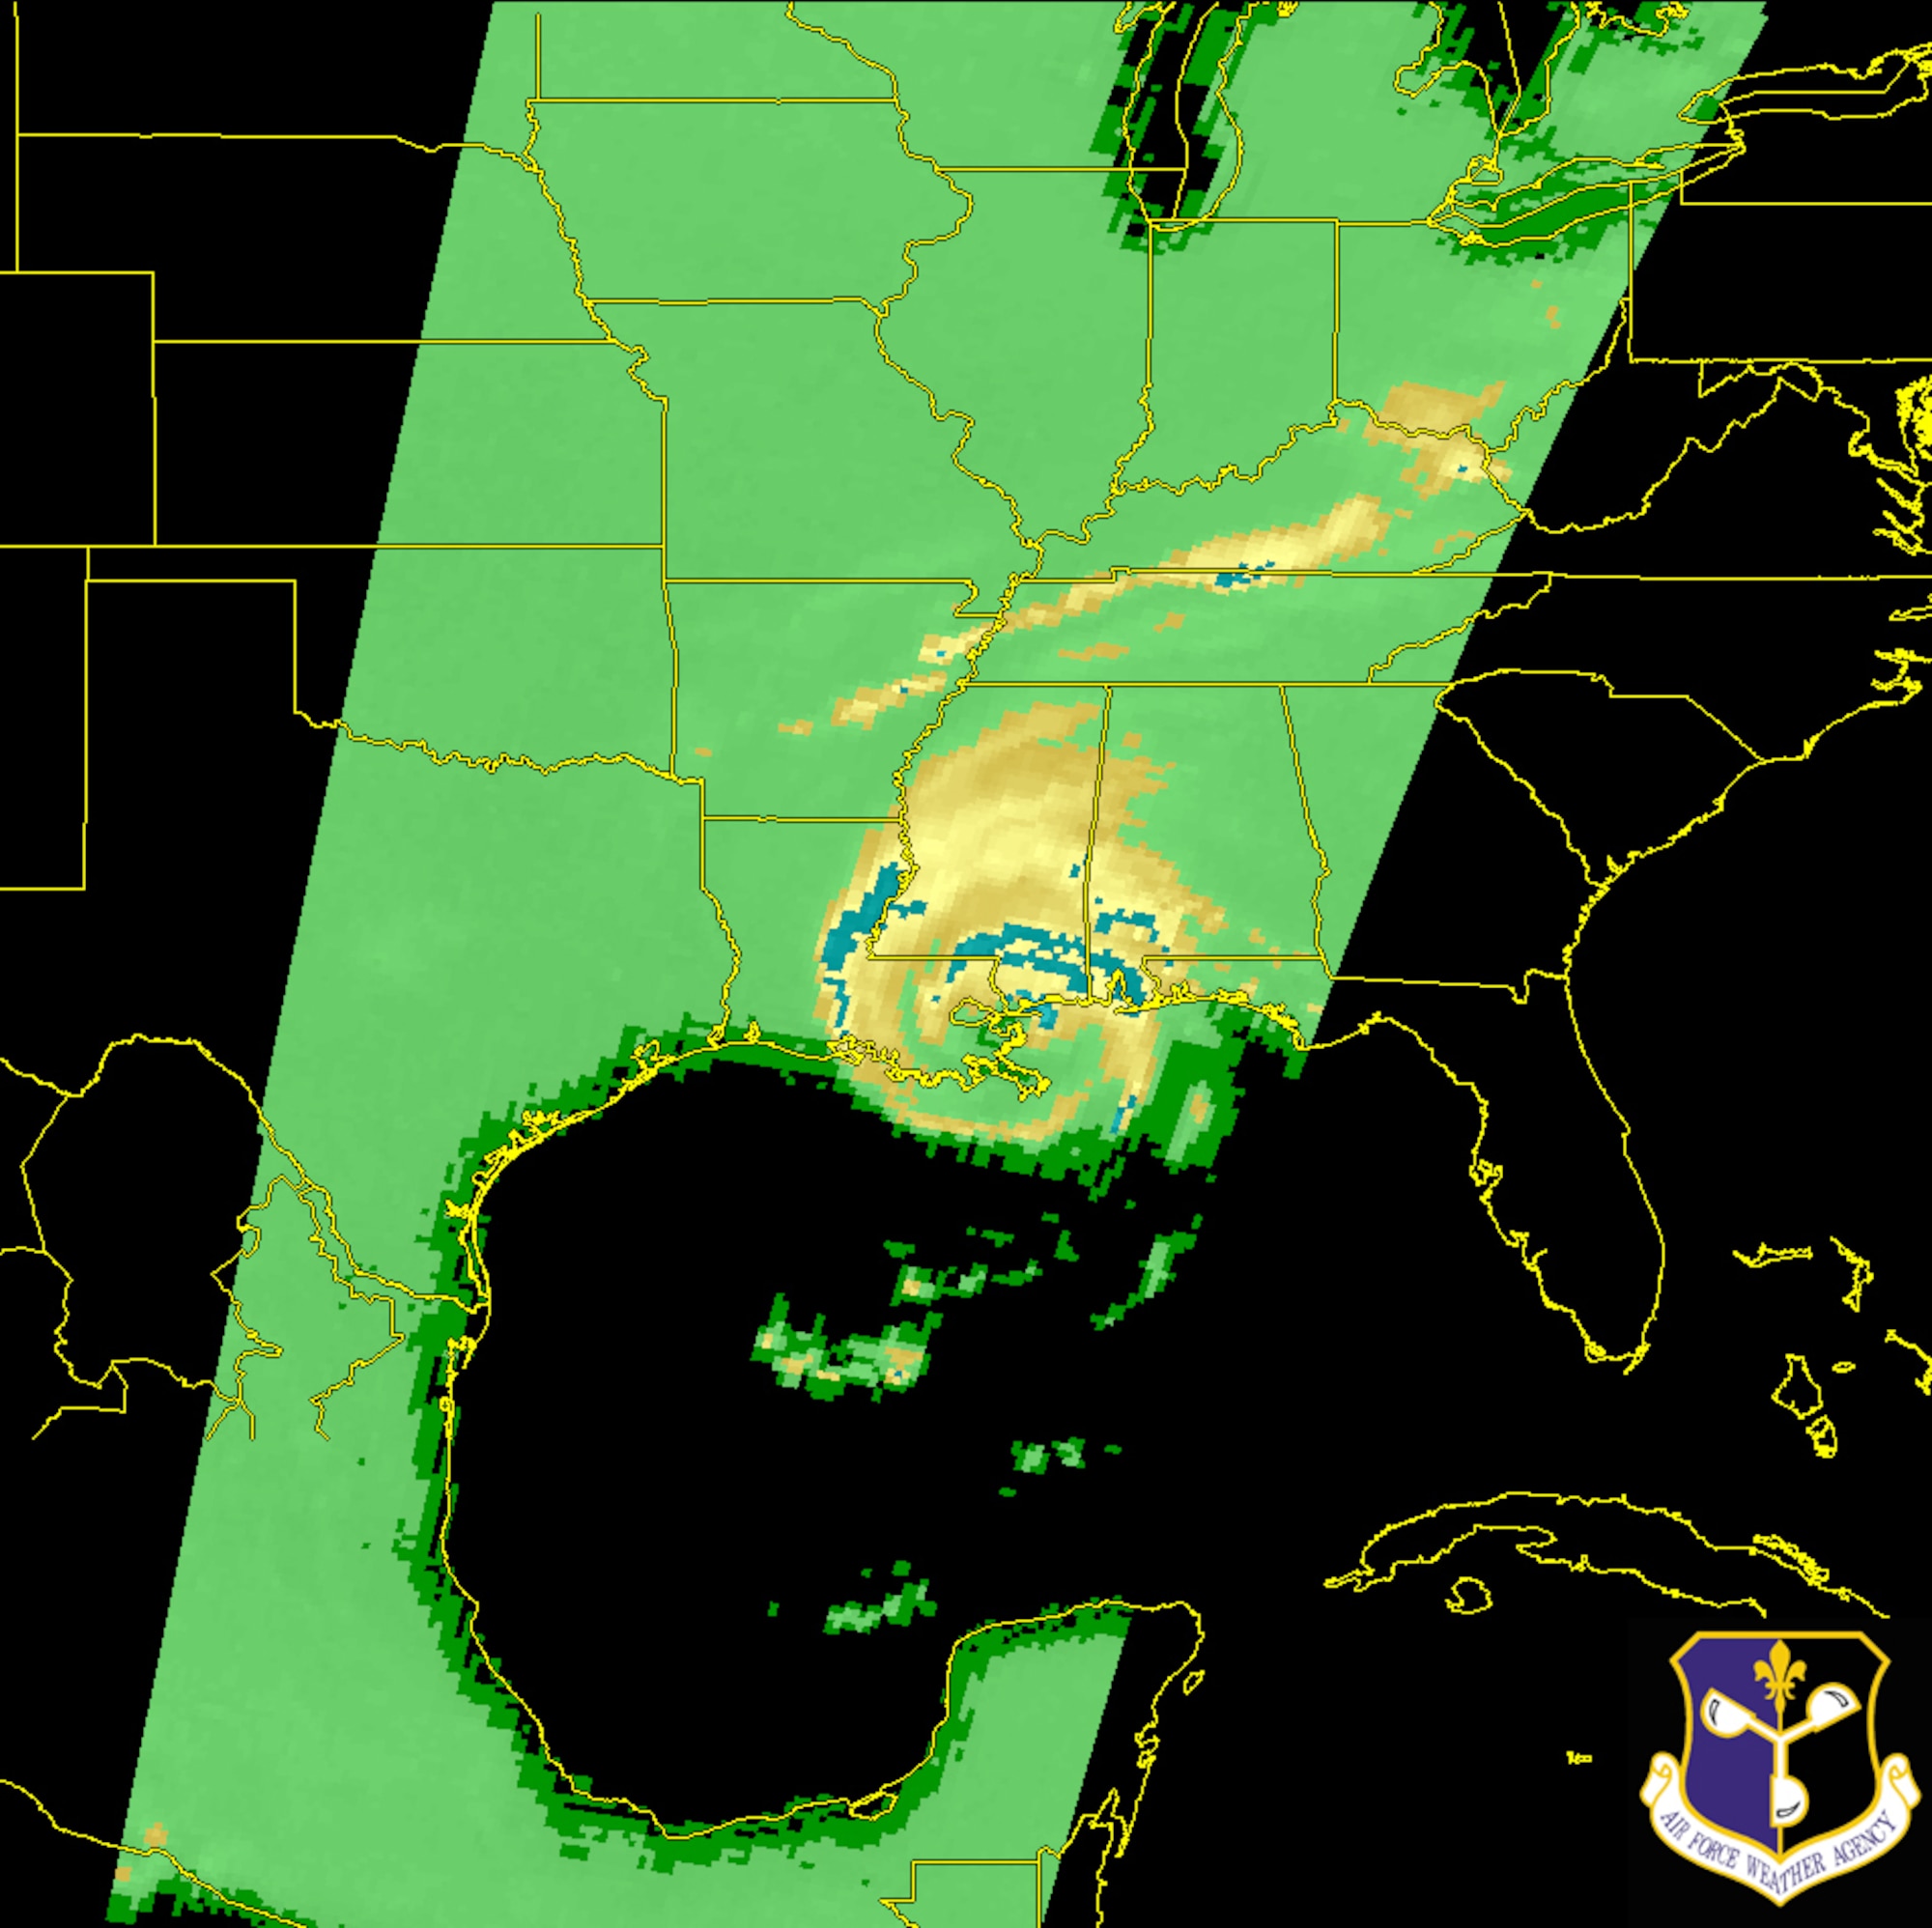 A Defense Meteorological Satellite Program satellite microwave image of Hurricane Katrina showing rainfall rates as the storm made landfall on the Gulf Coast of the United States Aug. 29, 2005. The DMSP F-15 satellite provides microwave imagery used to determine realtime rainfall rates during tropical storms. The yellow areas have rates of 1 inch per hour. The blue areas are rates of 1.5 to 2.5 inches per hour. Image courtesy of the Air Force Weather Agency. 